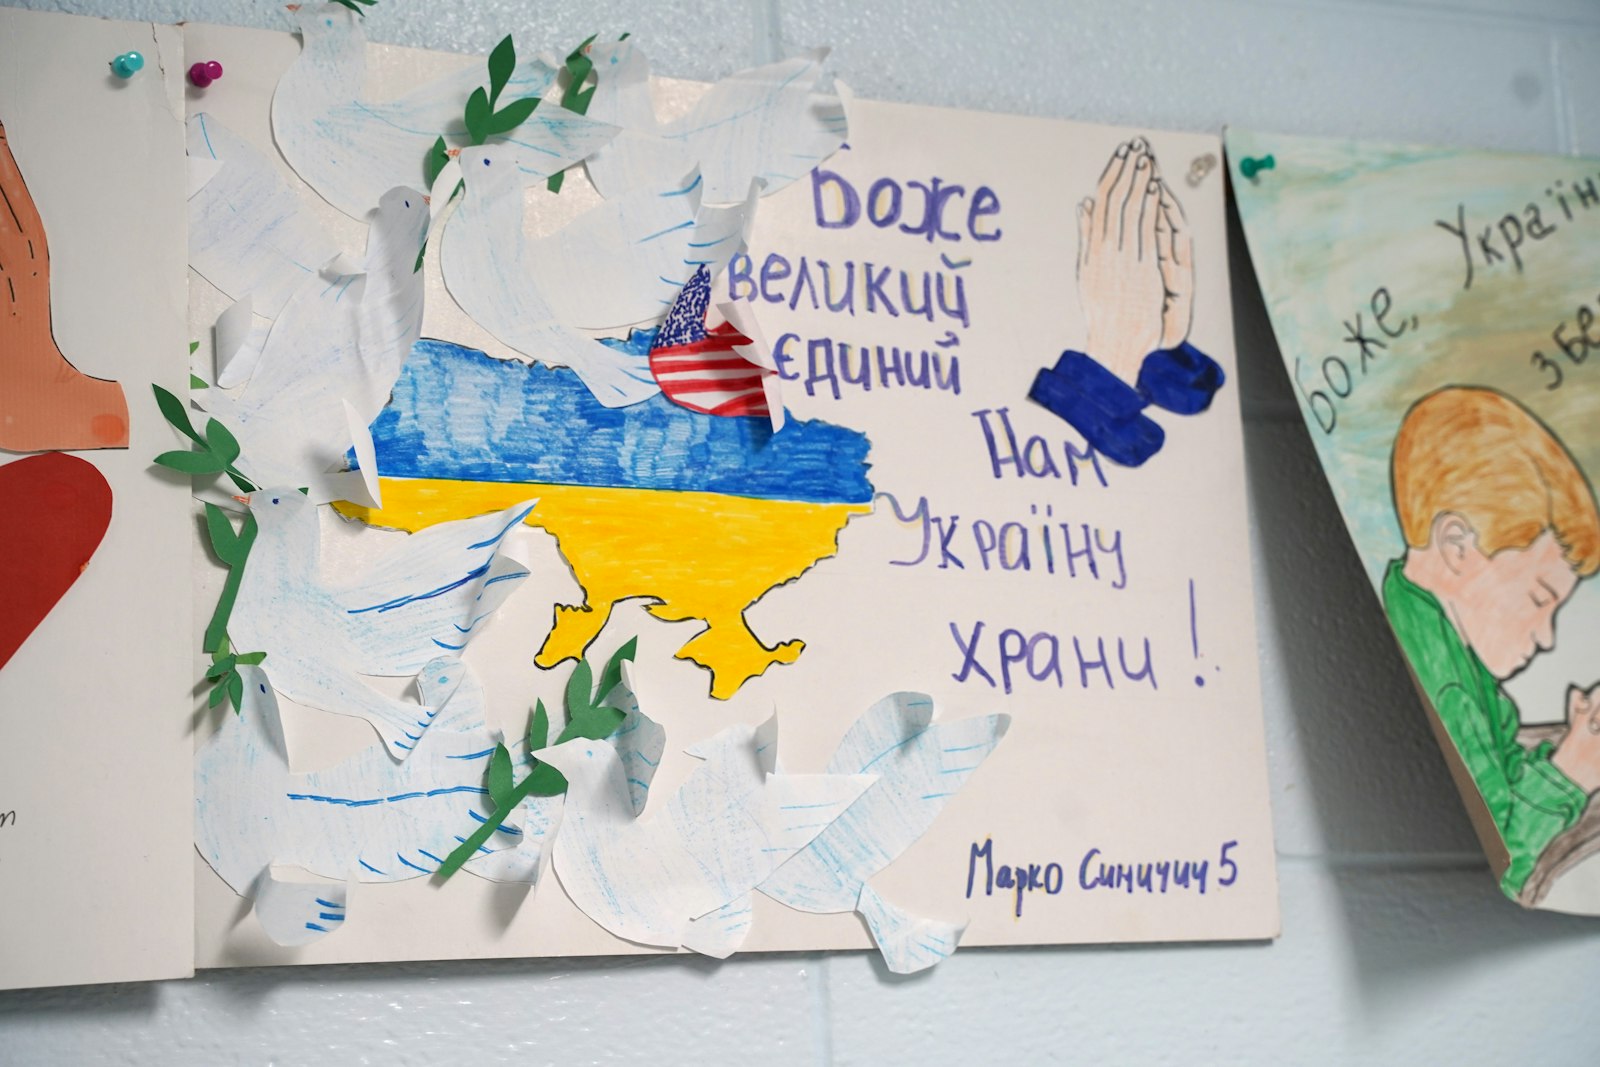 Posters urging prayer for the people of Ukraine are pictured inside a classroom at Immaculate Conception Ukrainian Catholic Schools in Warren. This fall, the school is welcoming up to 100 refugee students who have fled the war in Ukraine.